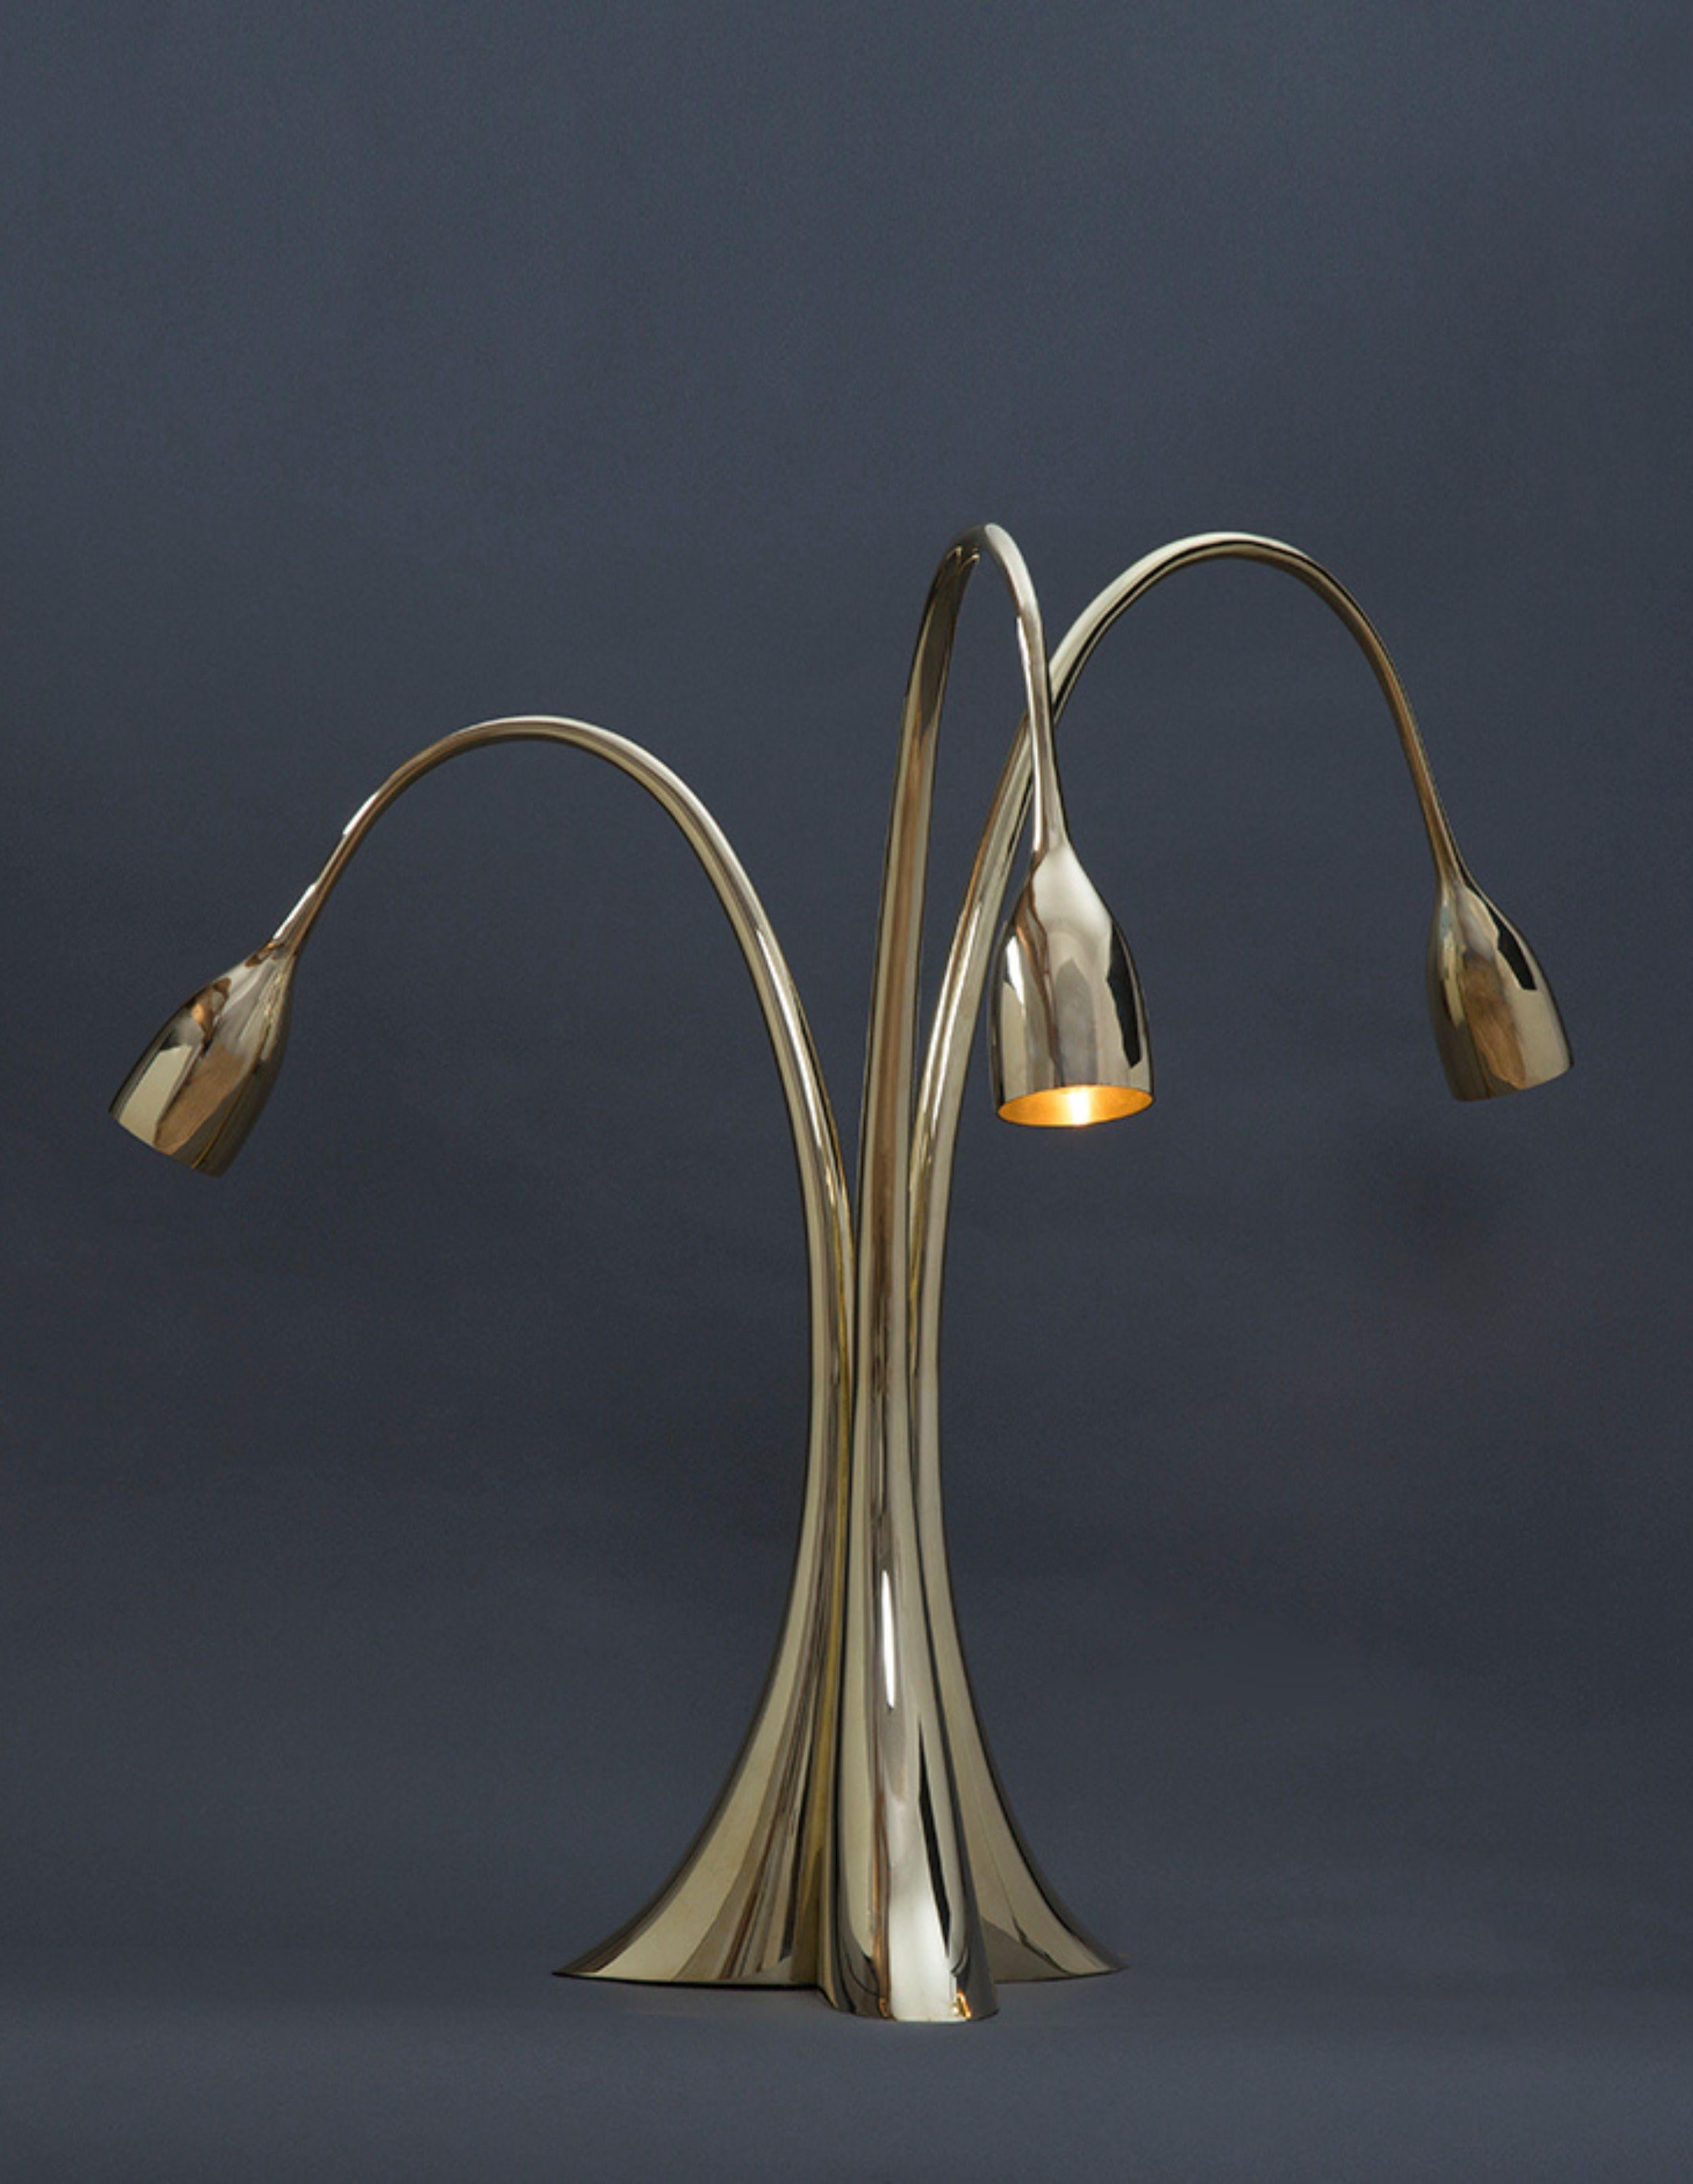 Tripod Lamp, three lights lamp, hammered brass Signed and numbered, after an original model from 1968 
Limited to 8 ex. + 4 A/P + 2 H/C 
JM Lelouch Editions
Former Collection Van Zuylen.